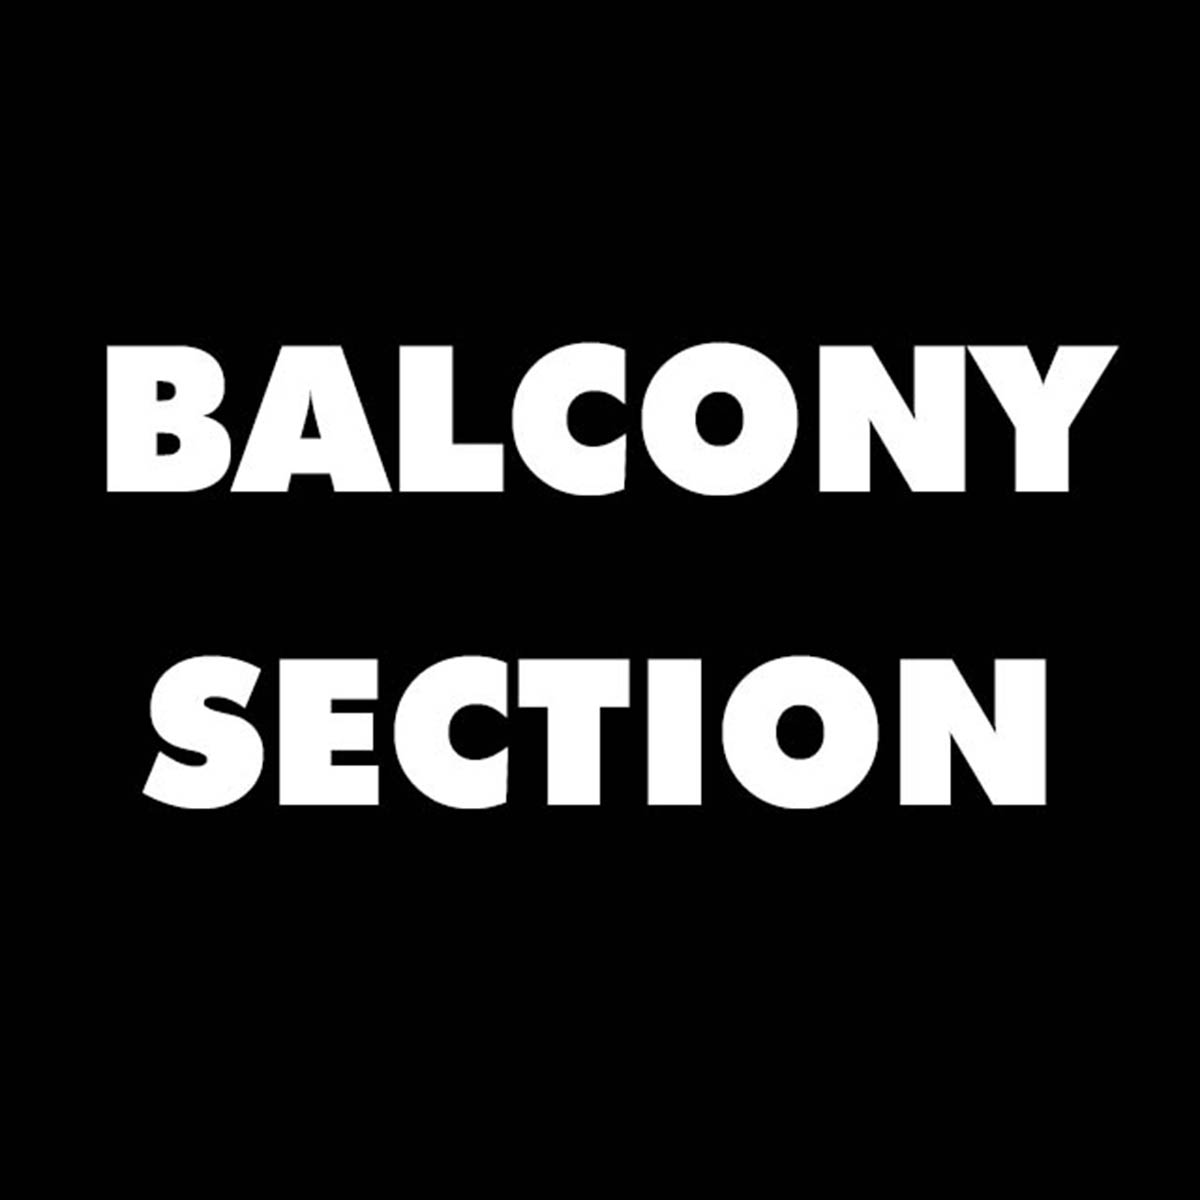 The Script - BALCONY SECTION